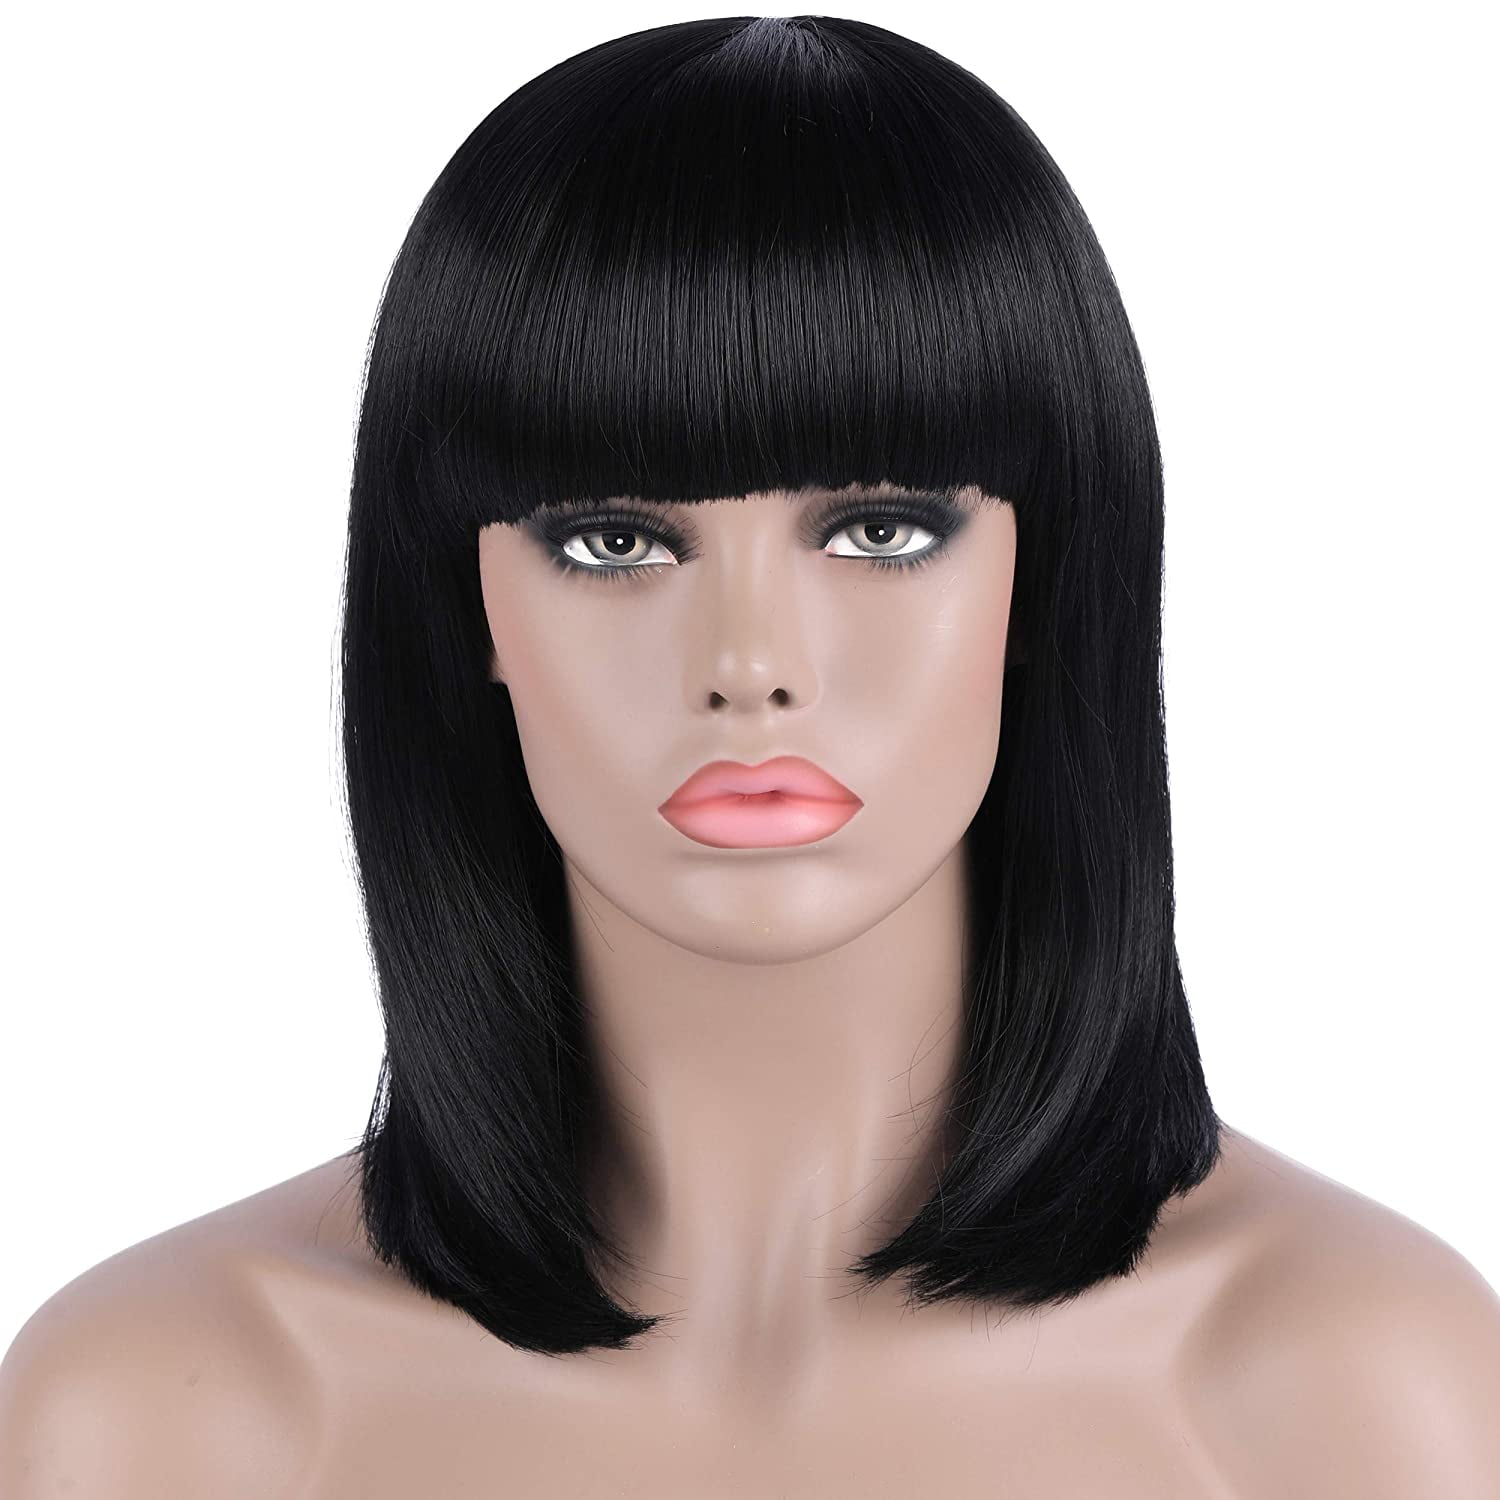 14 inch Shoulder length wavy wigs with bangs for black women natural looking short curly synthetic hair wigs heat resistant Black mix Brown-02